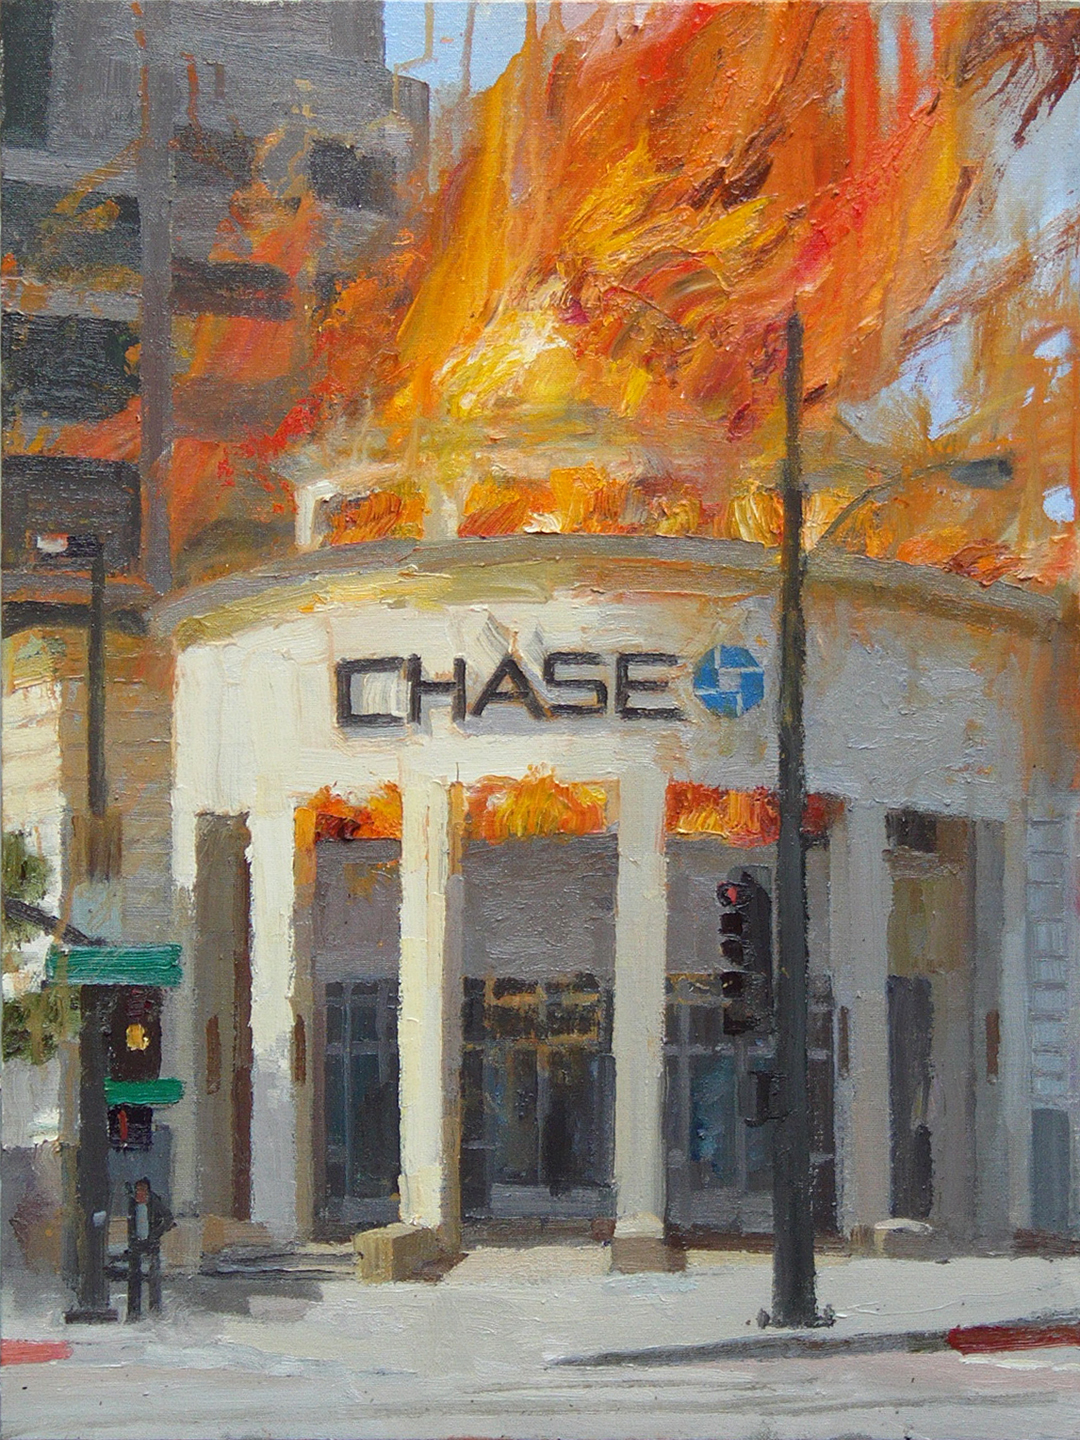 alex schaefer paintings - Chase